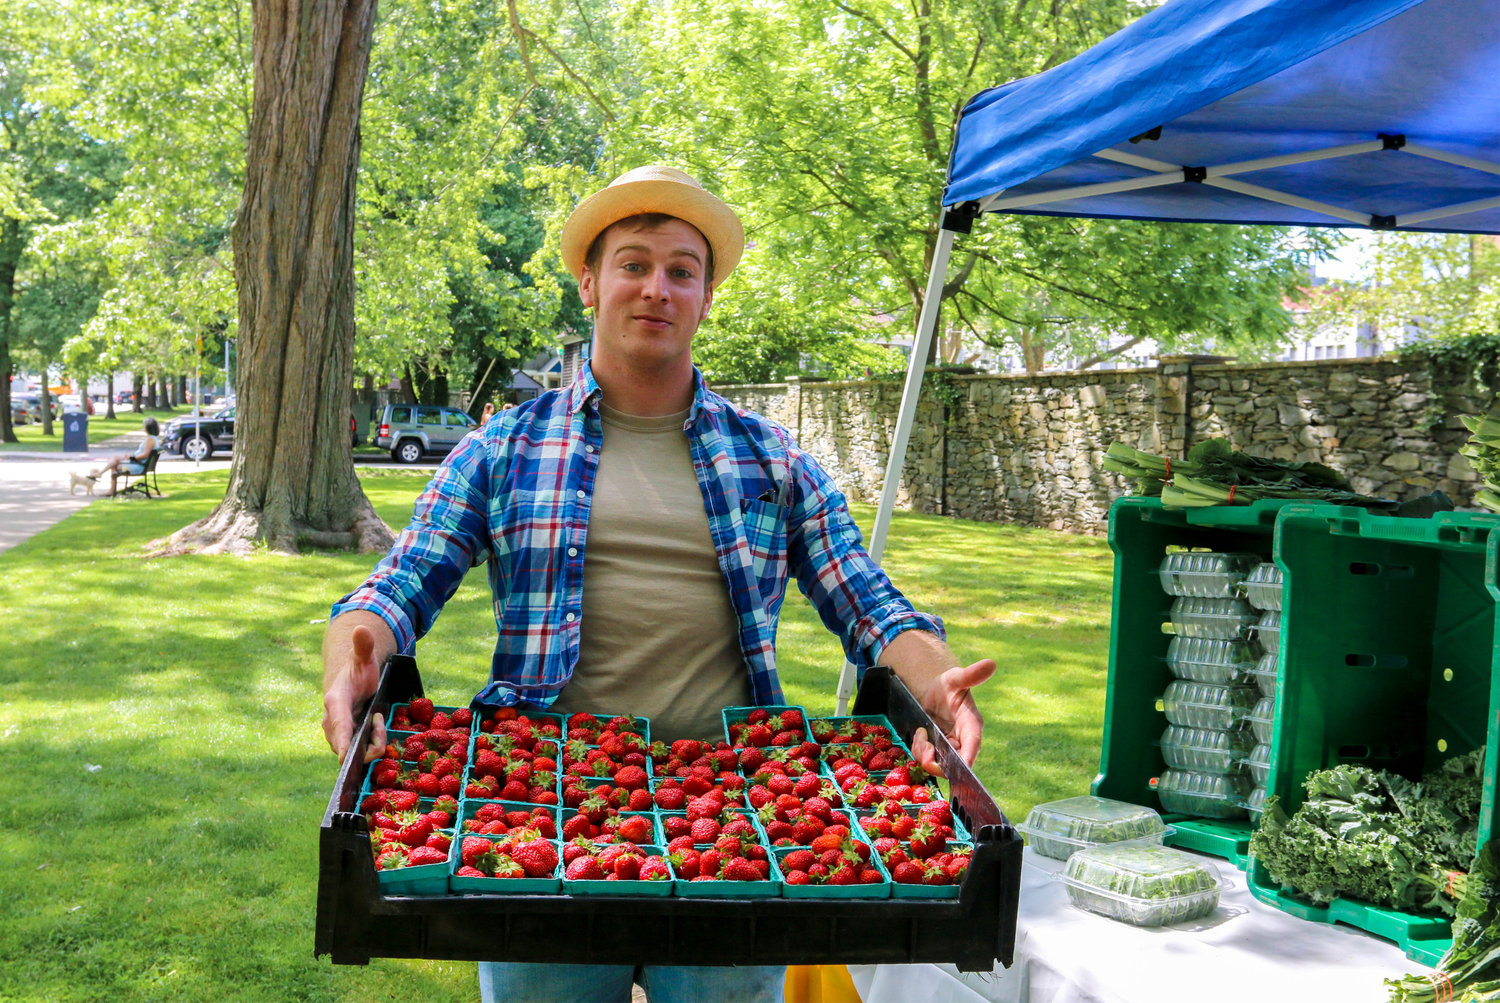 Aquidneck Growers Markets has three summer markets so getting produce outdoors is a breeze